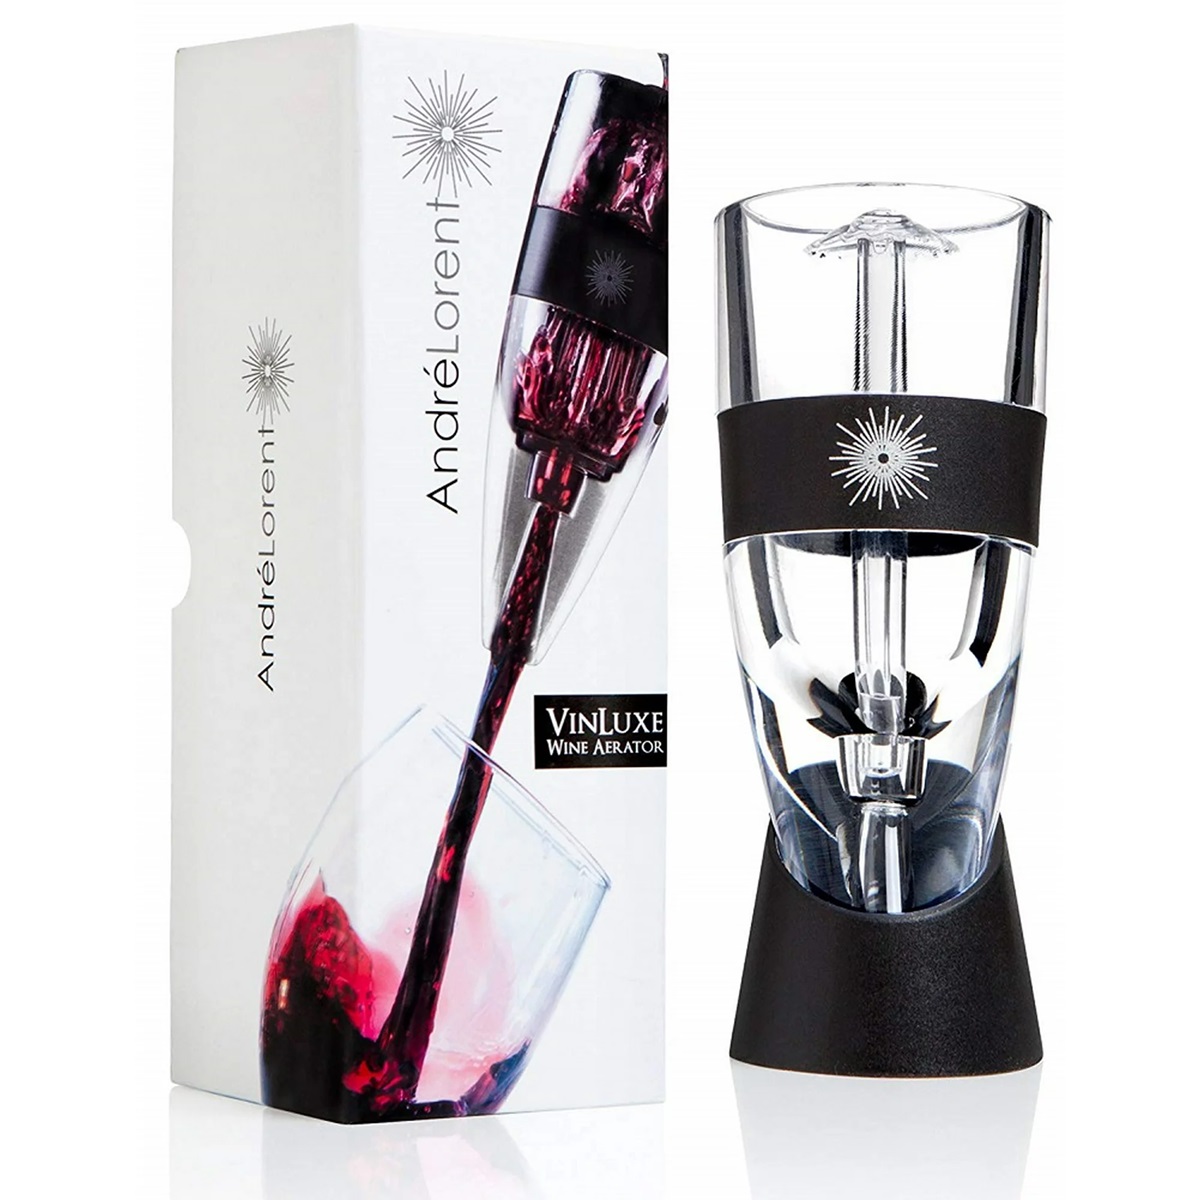 VinLuxe PRO Wine Aerator Diffuser Pourer Decanter with Carrying Case, Black - image 2 of 5